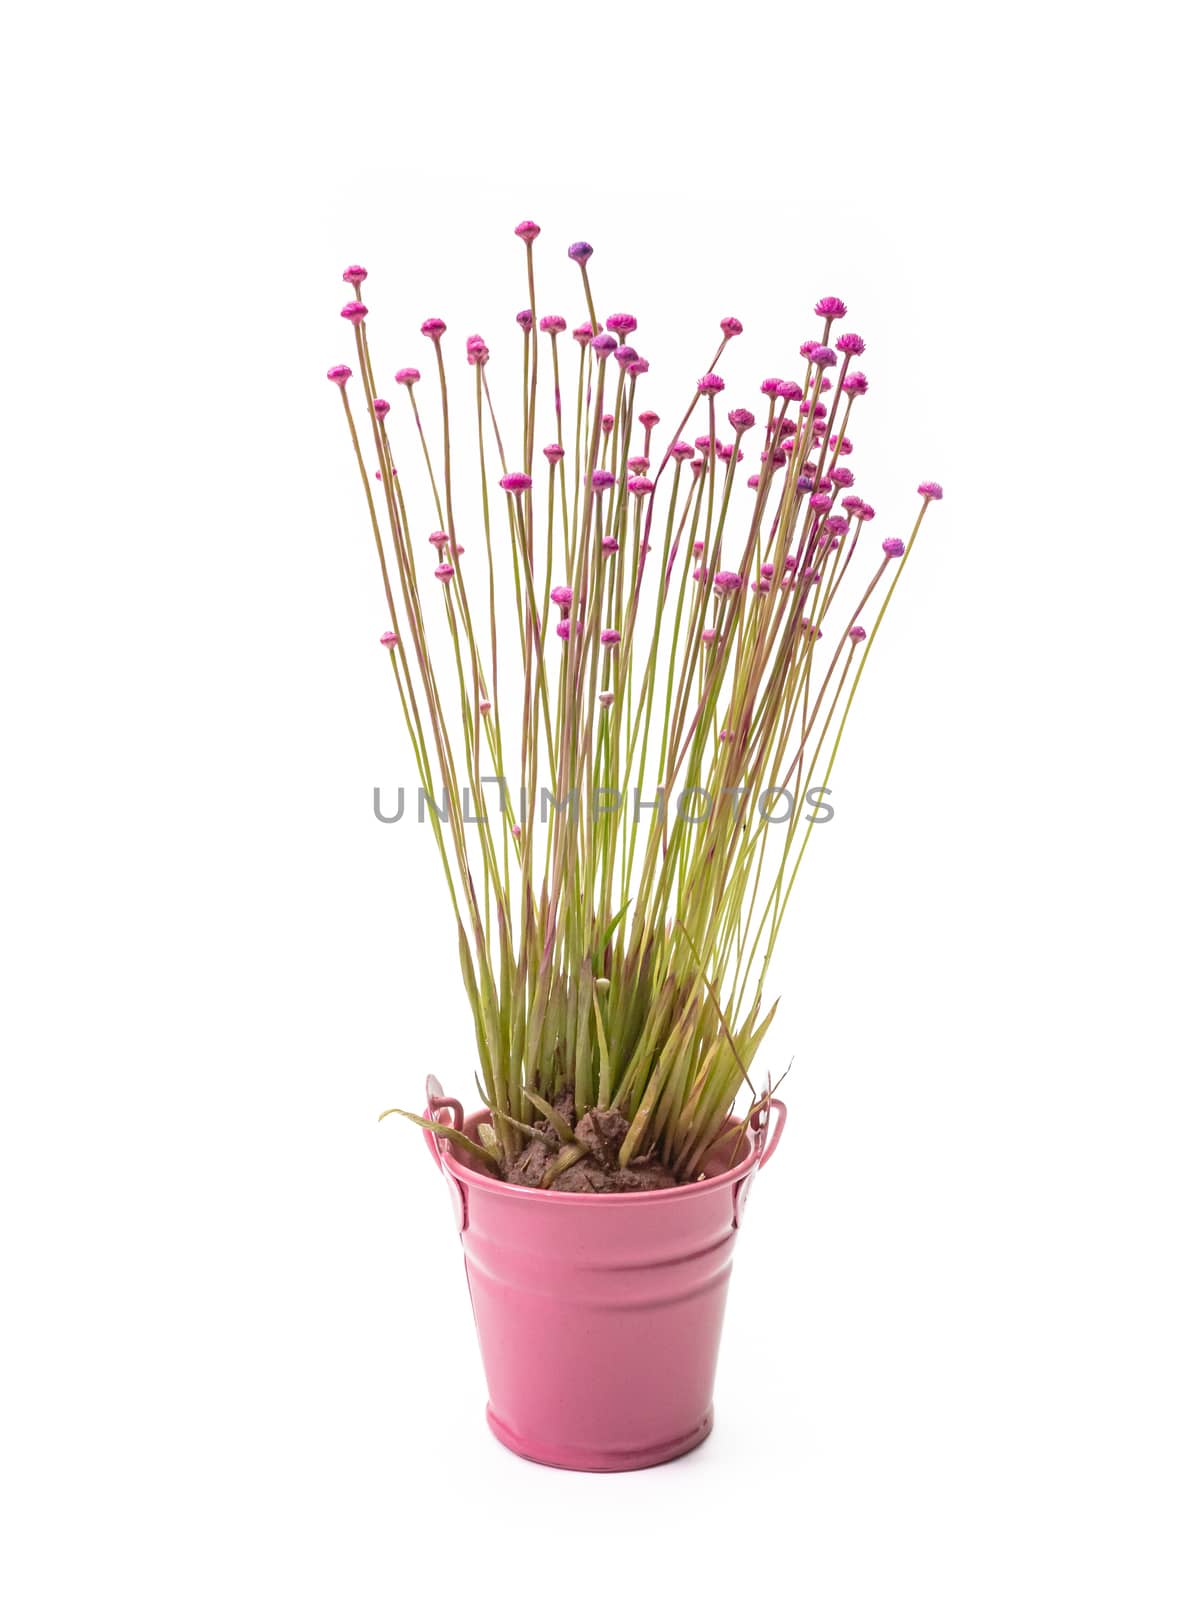 The Lachnocaulon bog button flower plant (La Ong Dao) in small pink pot by phasuthorn